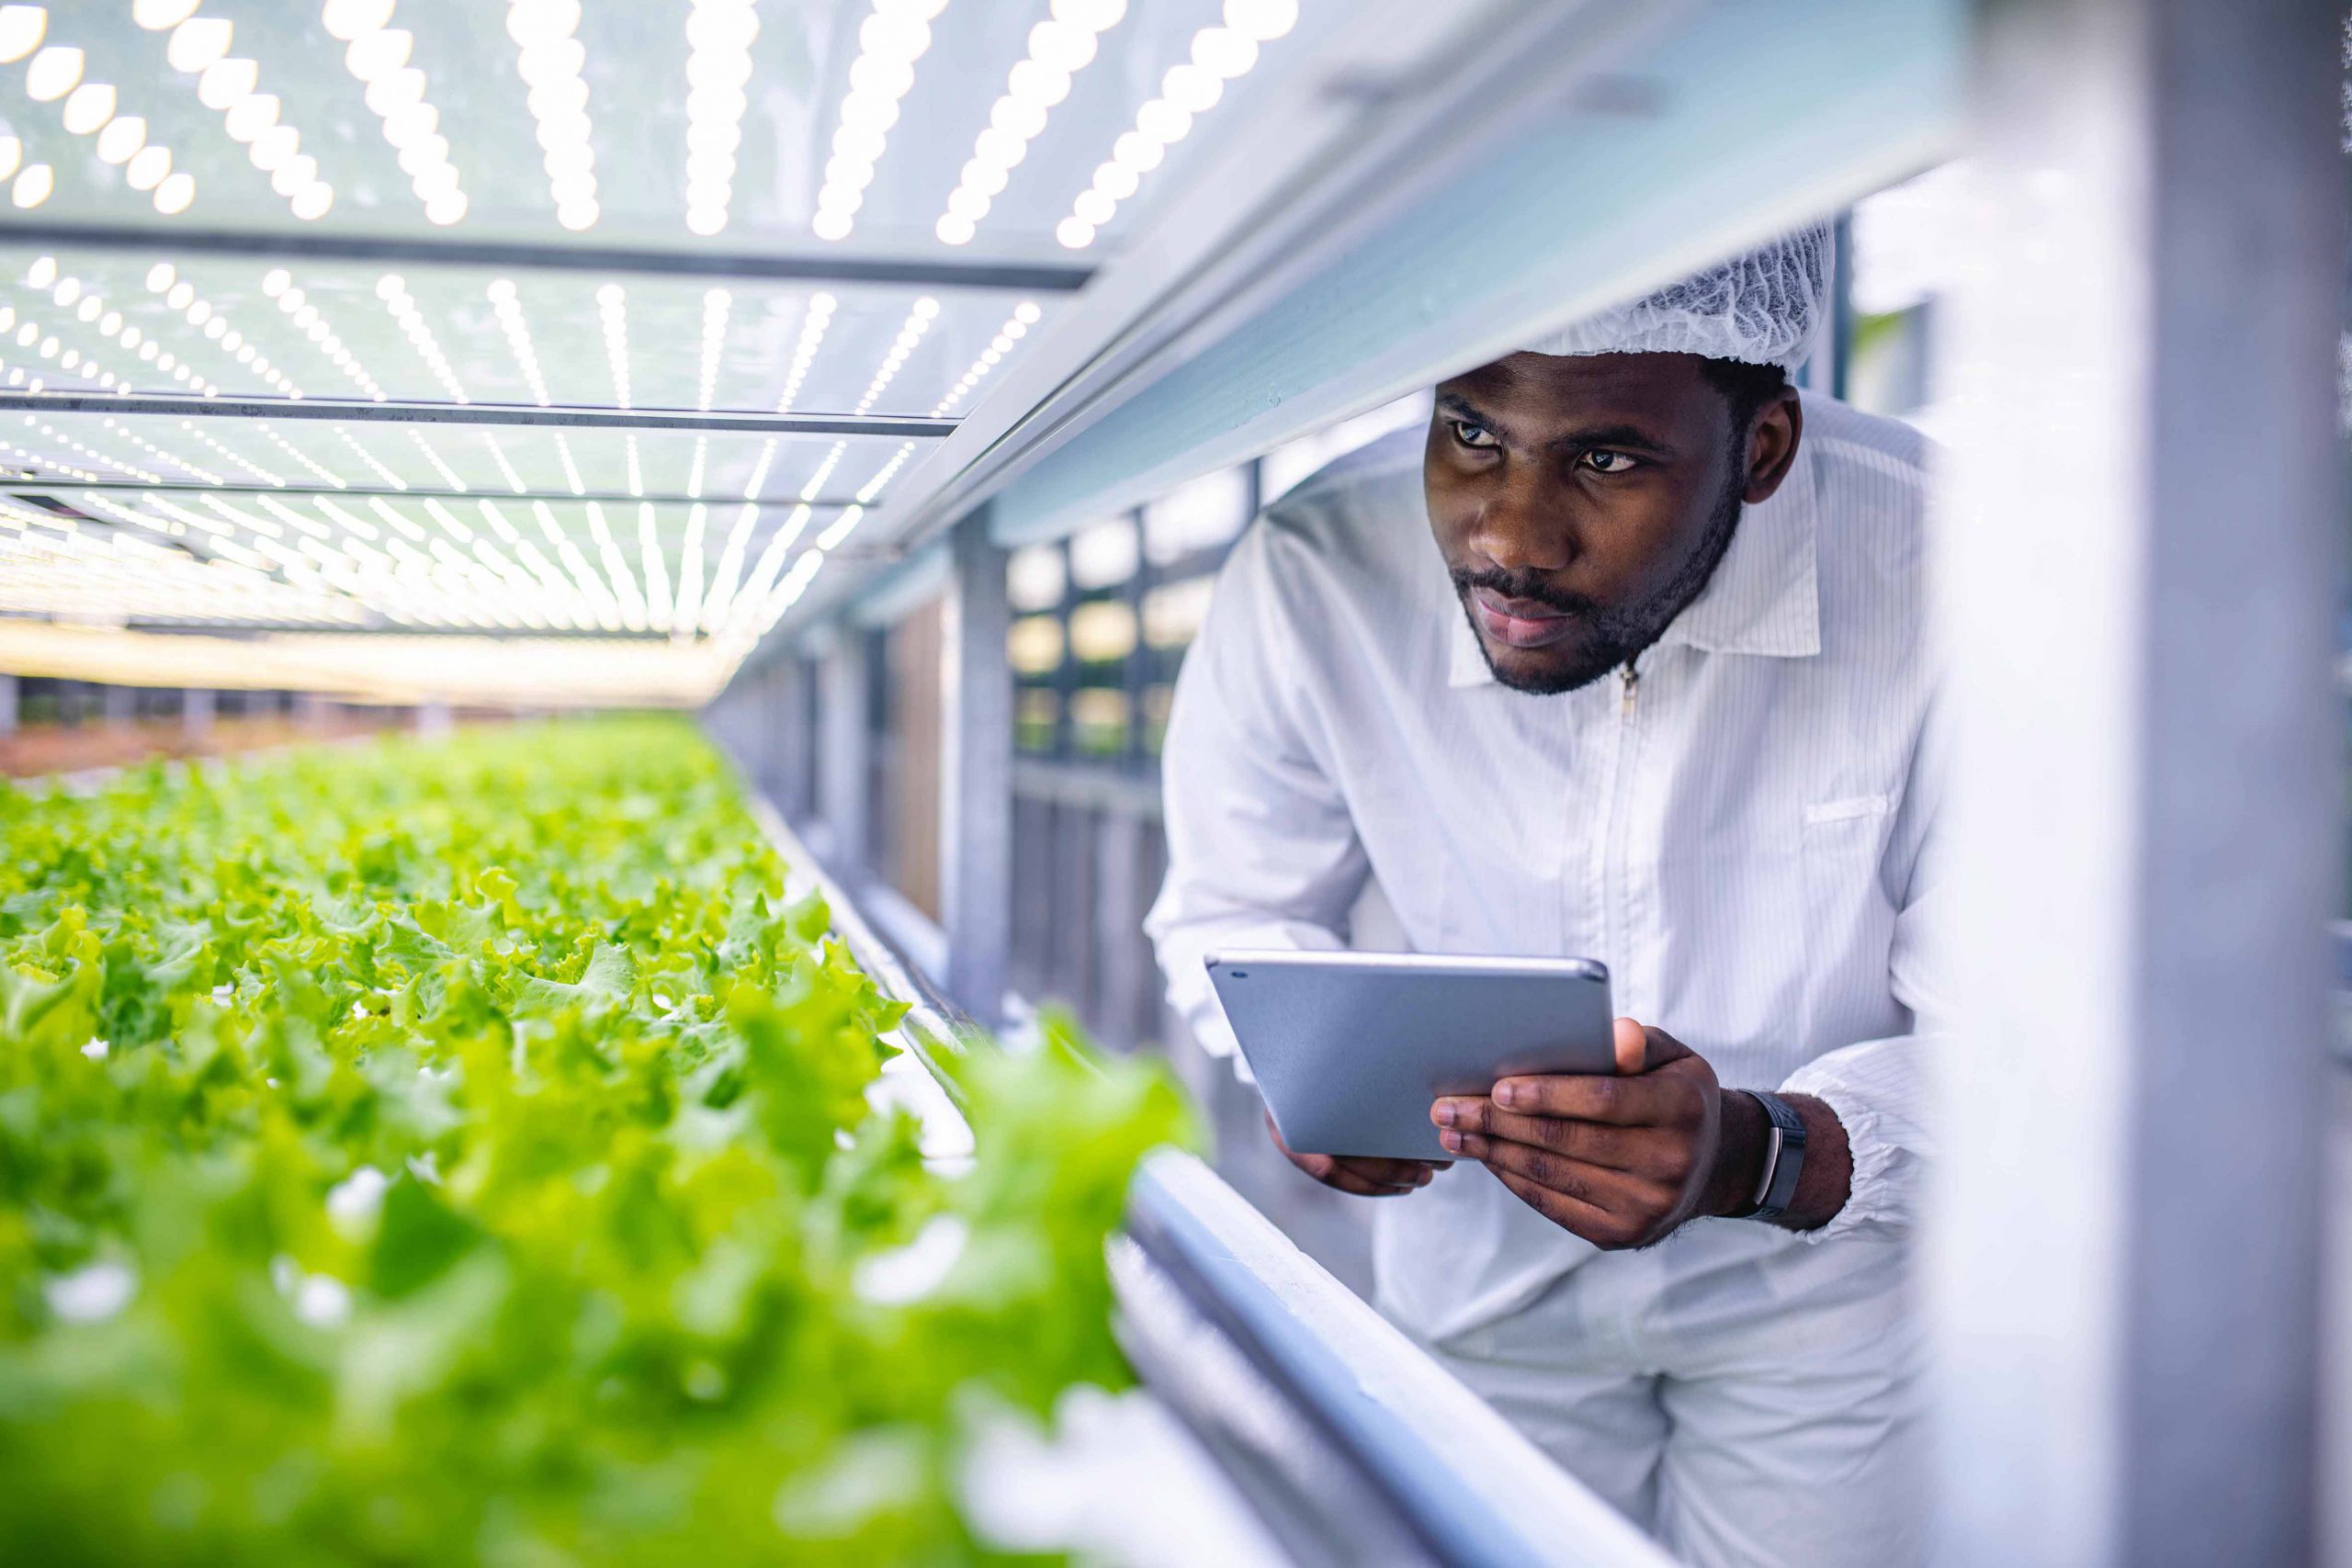 Rapidly Find Innovative Solutions to AgriFood Challenges in Nigeria